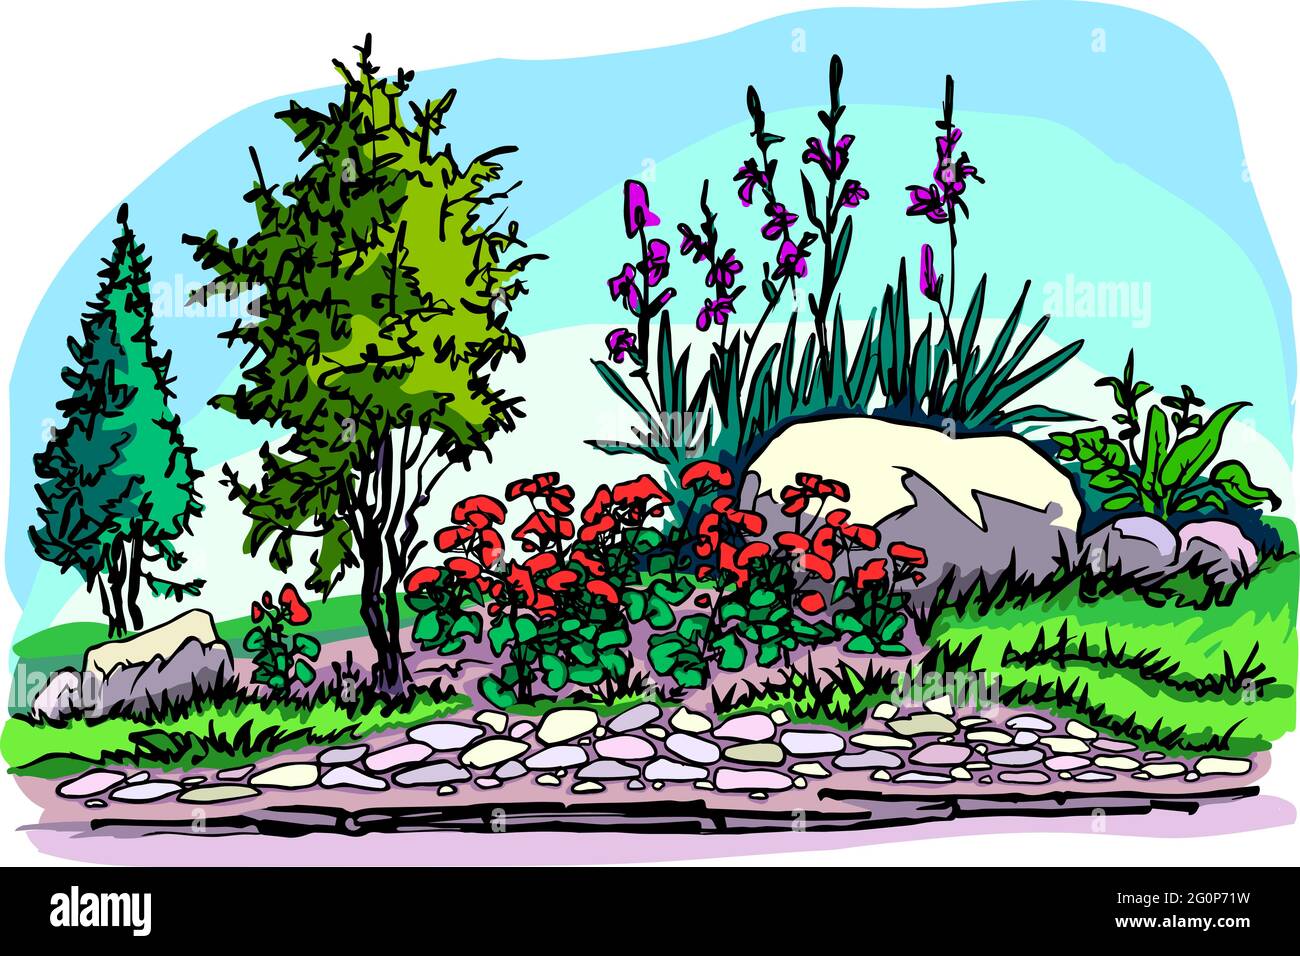 A flower bed with stones, conifers, geraniums, irises and hosta. Stock Vector